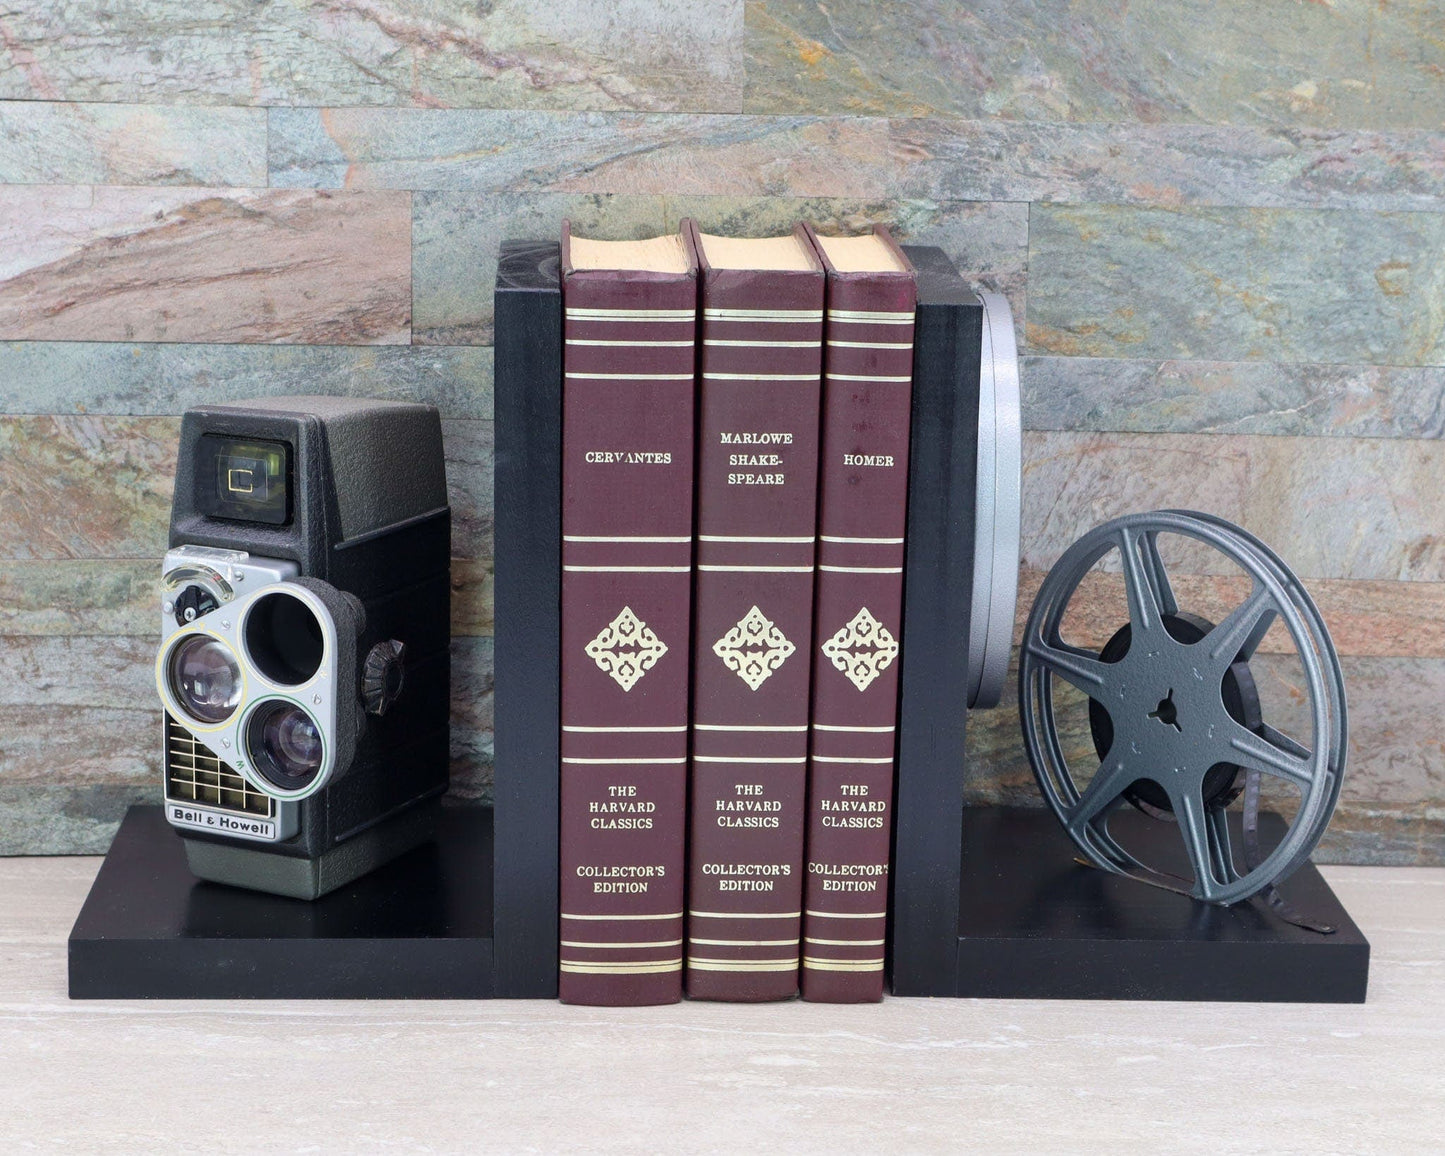 LightAndTimeArt Bookends Vintage Movie Camera Bookends, Bell and Howell, DVD Holder, Home Theater & Movie Room Décor, Eco-friendly Book and Vintage Lover gift